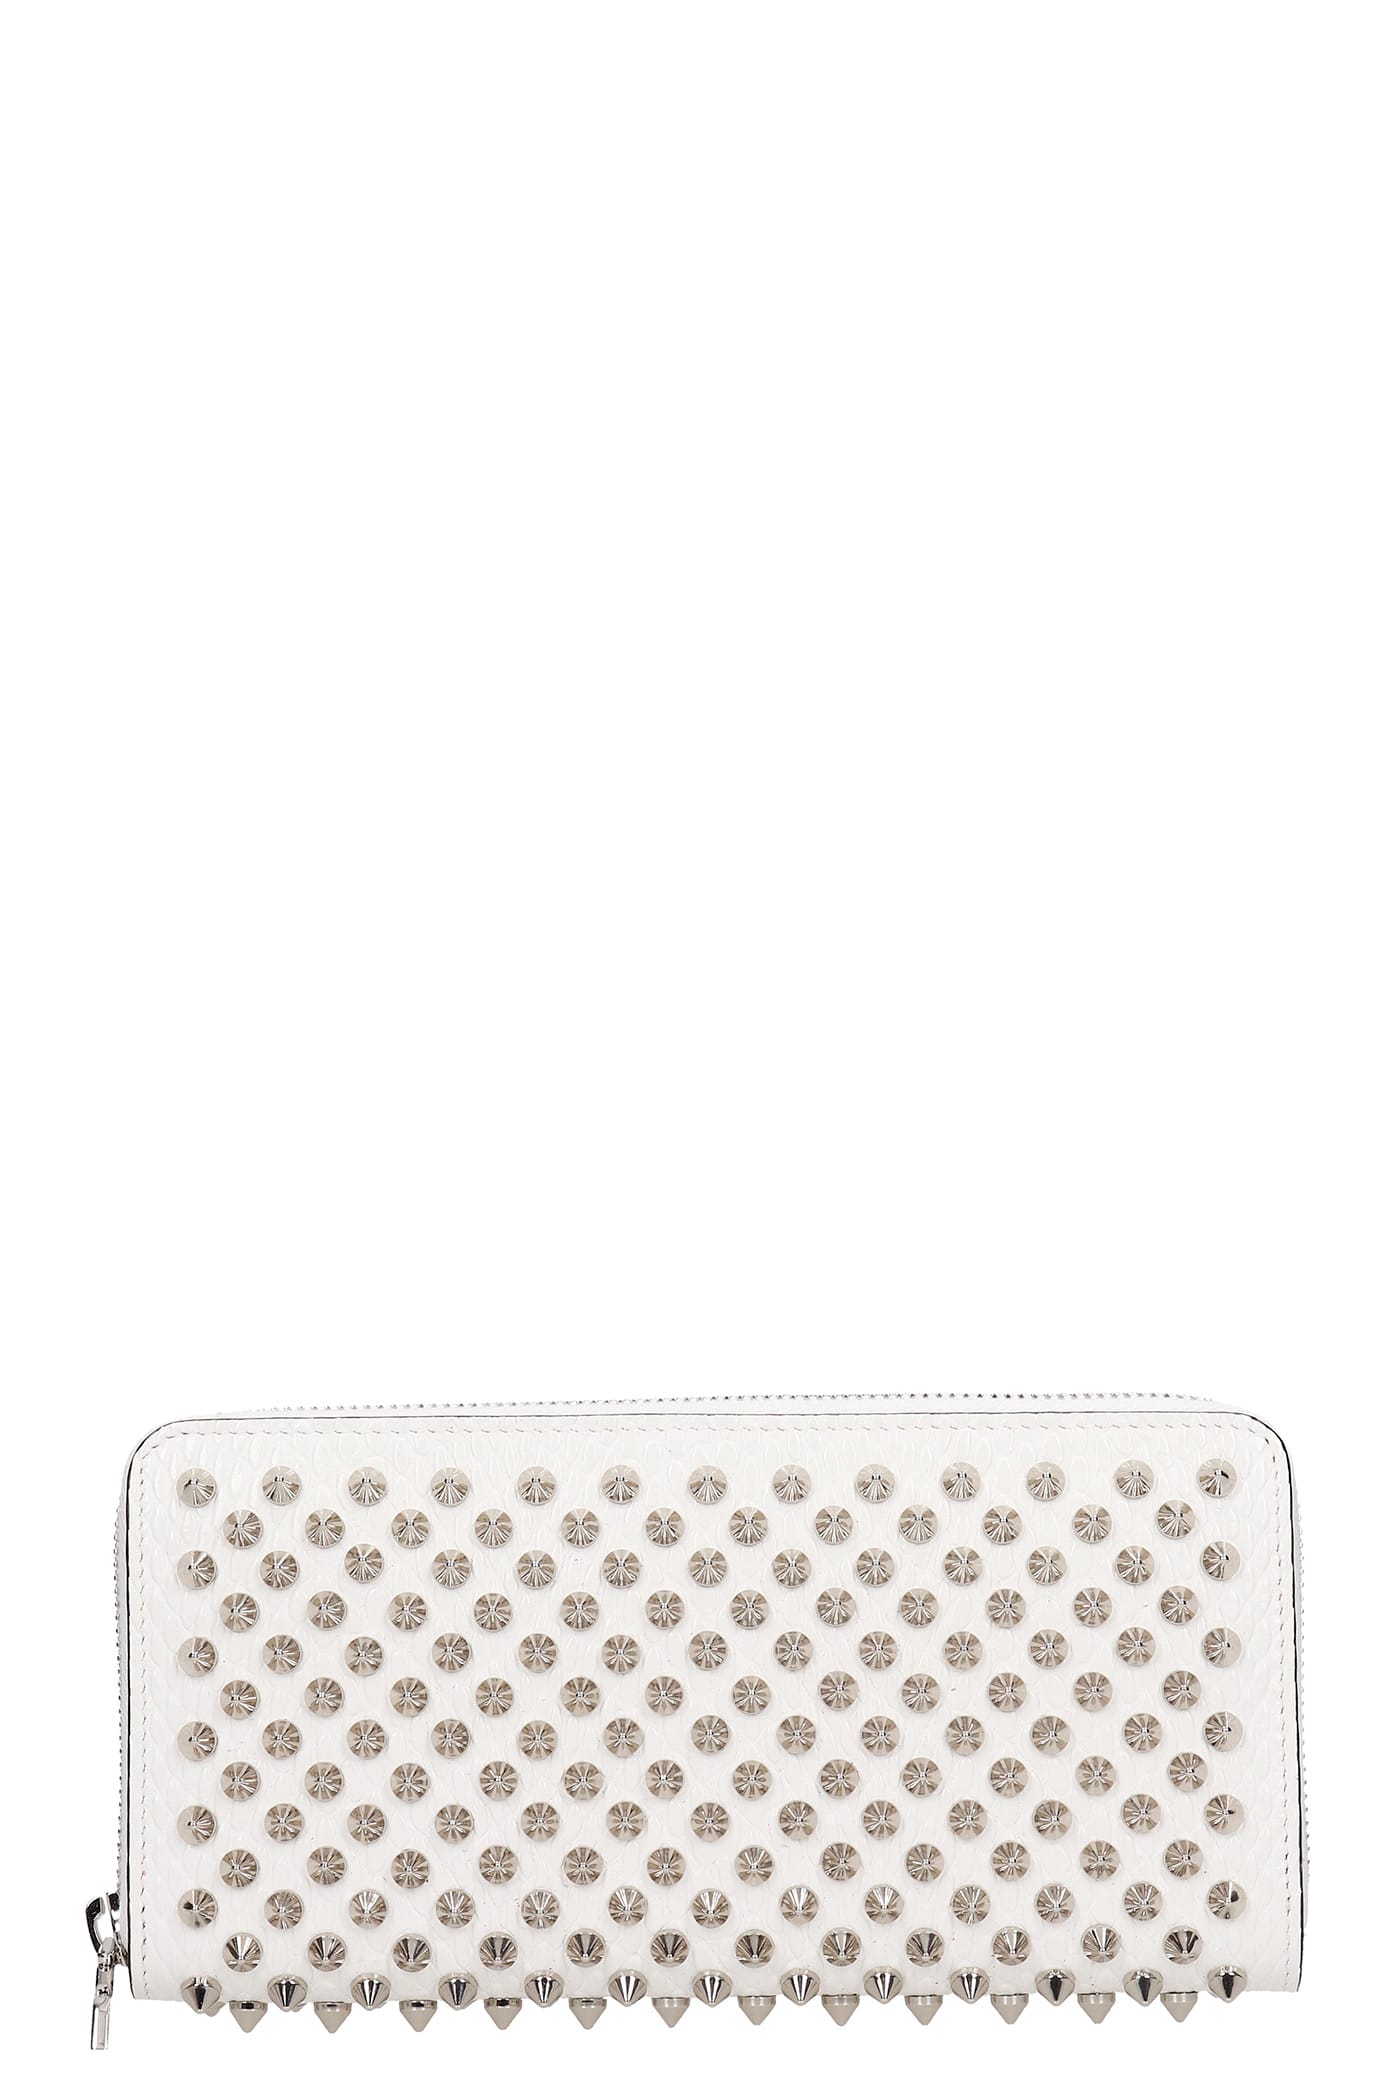 CHRISTIAN LOUBOUTIN PANETTONE WALLET IN WHITE LEATHER,3205076H924